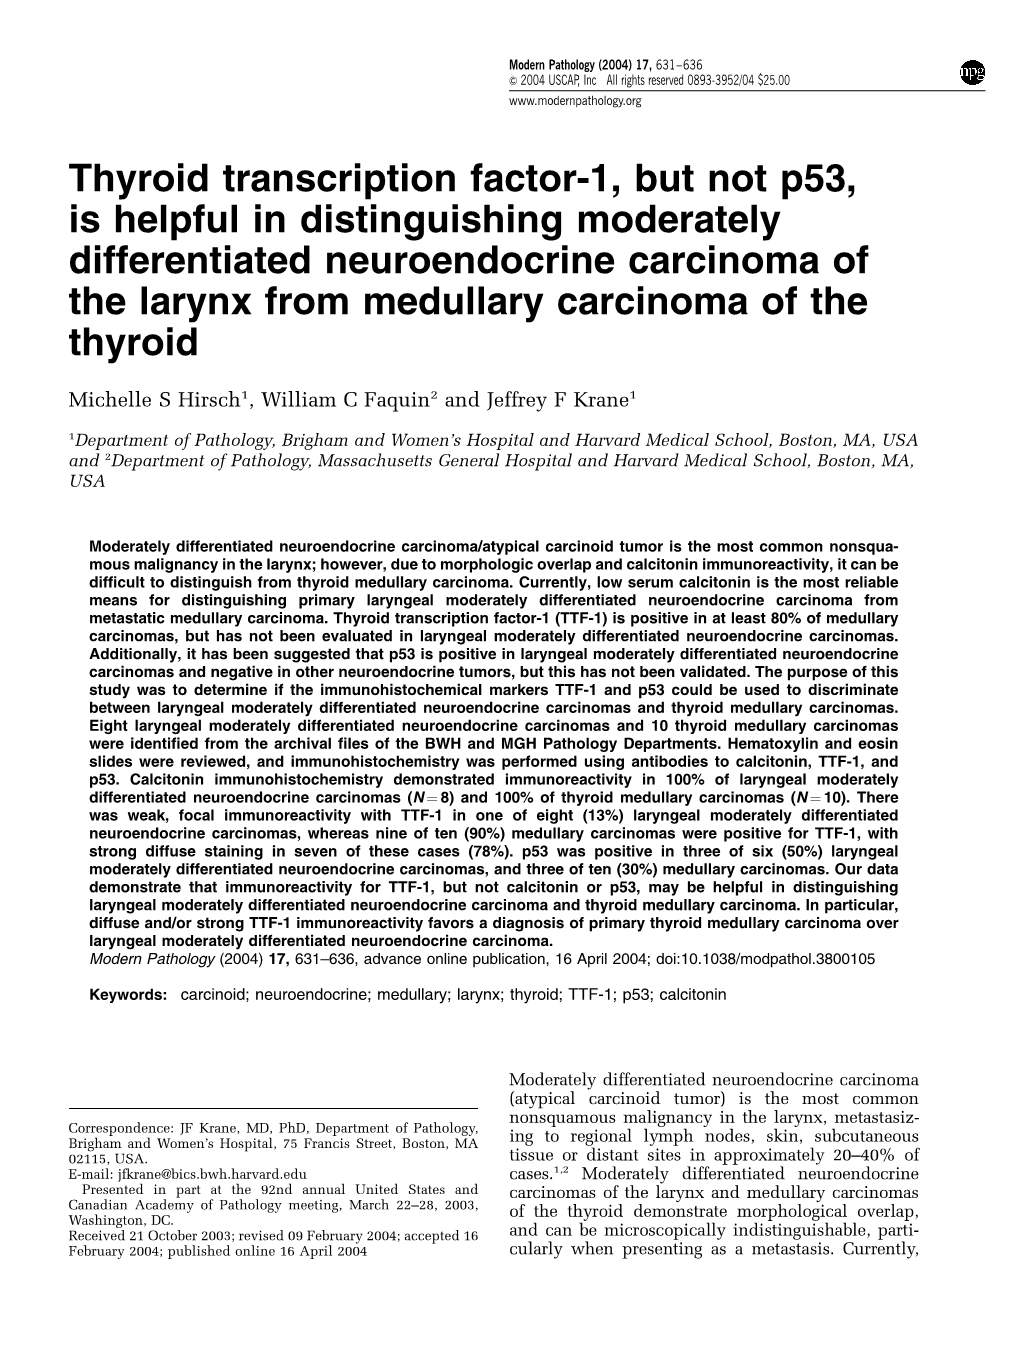 Thyroid Transcription Factor-1, but Not P53, Is Helpful in Distinguishing